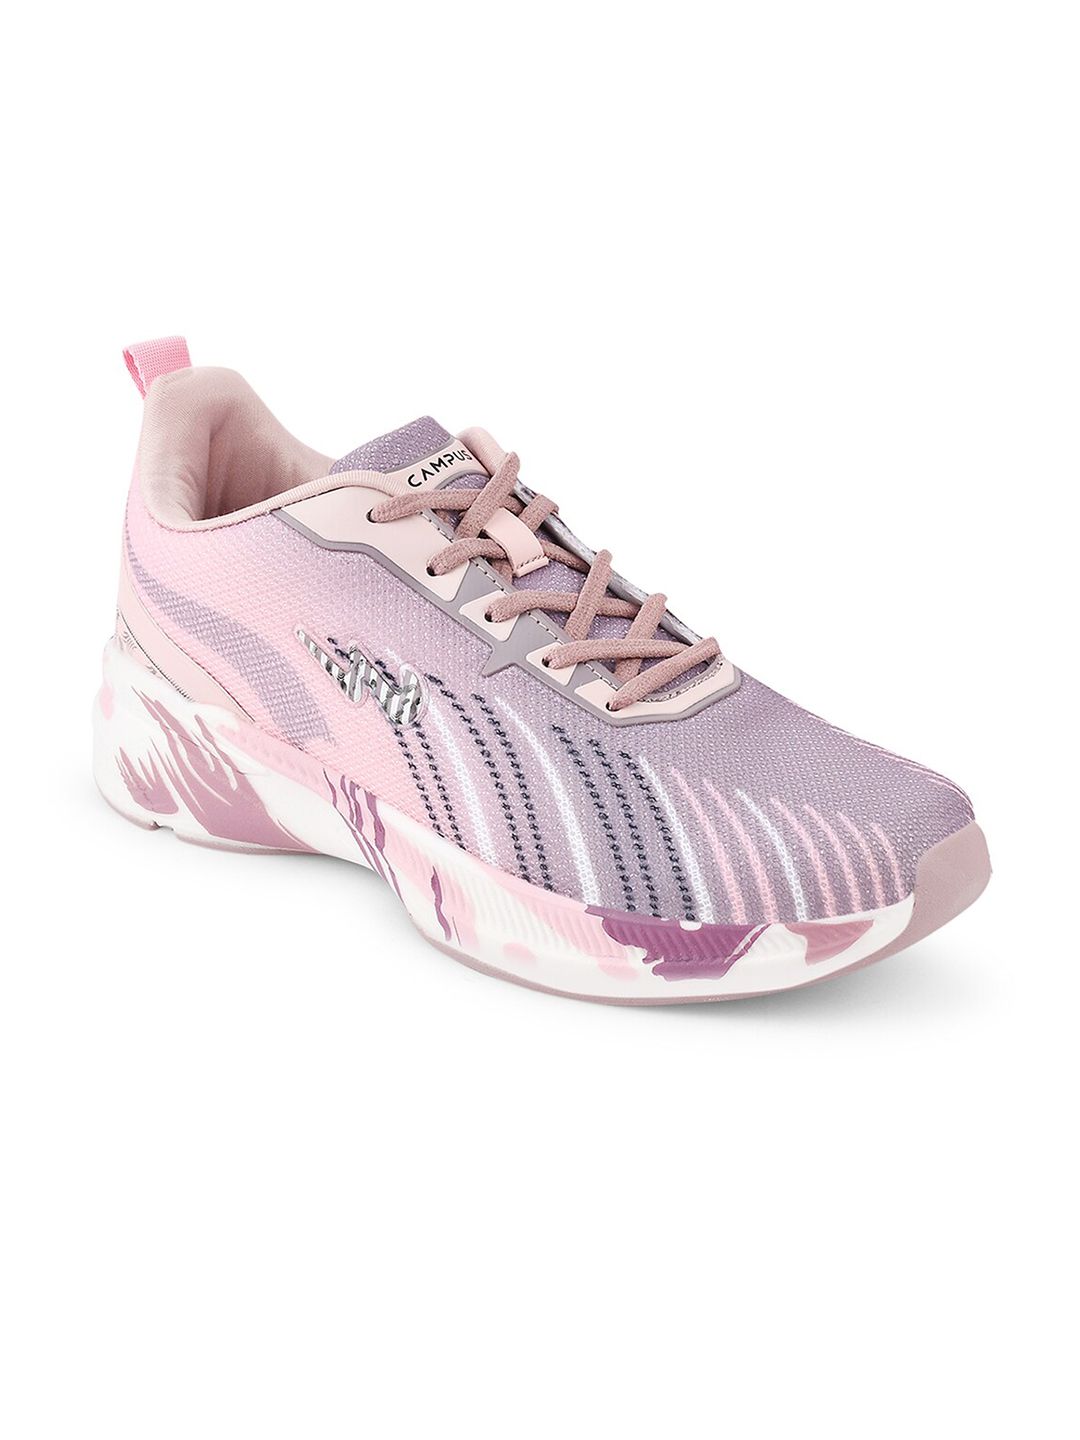 Campus Women Mauve & Peach Printed Mesh Running Shoes Price in India